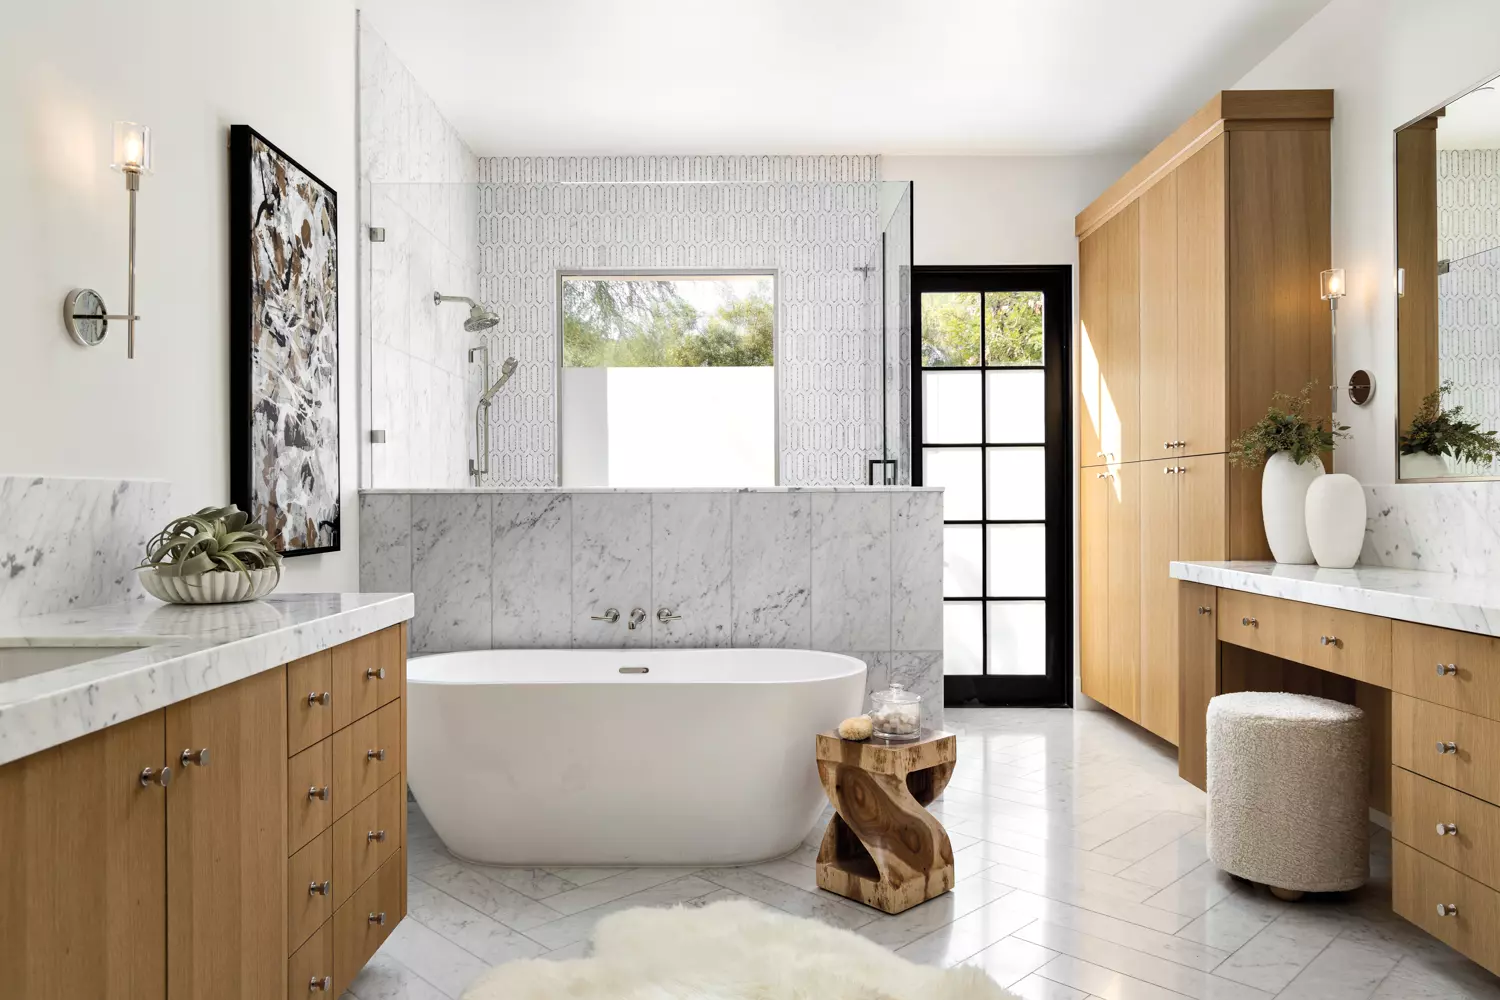 Spa-like bathroom with white oak cabinetry, a freestanding tub and marble floors